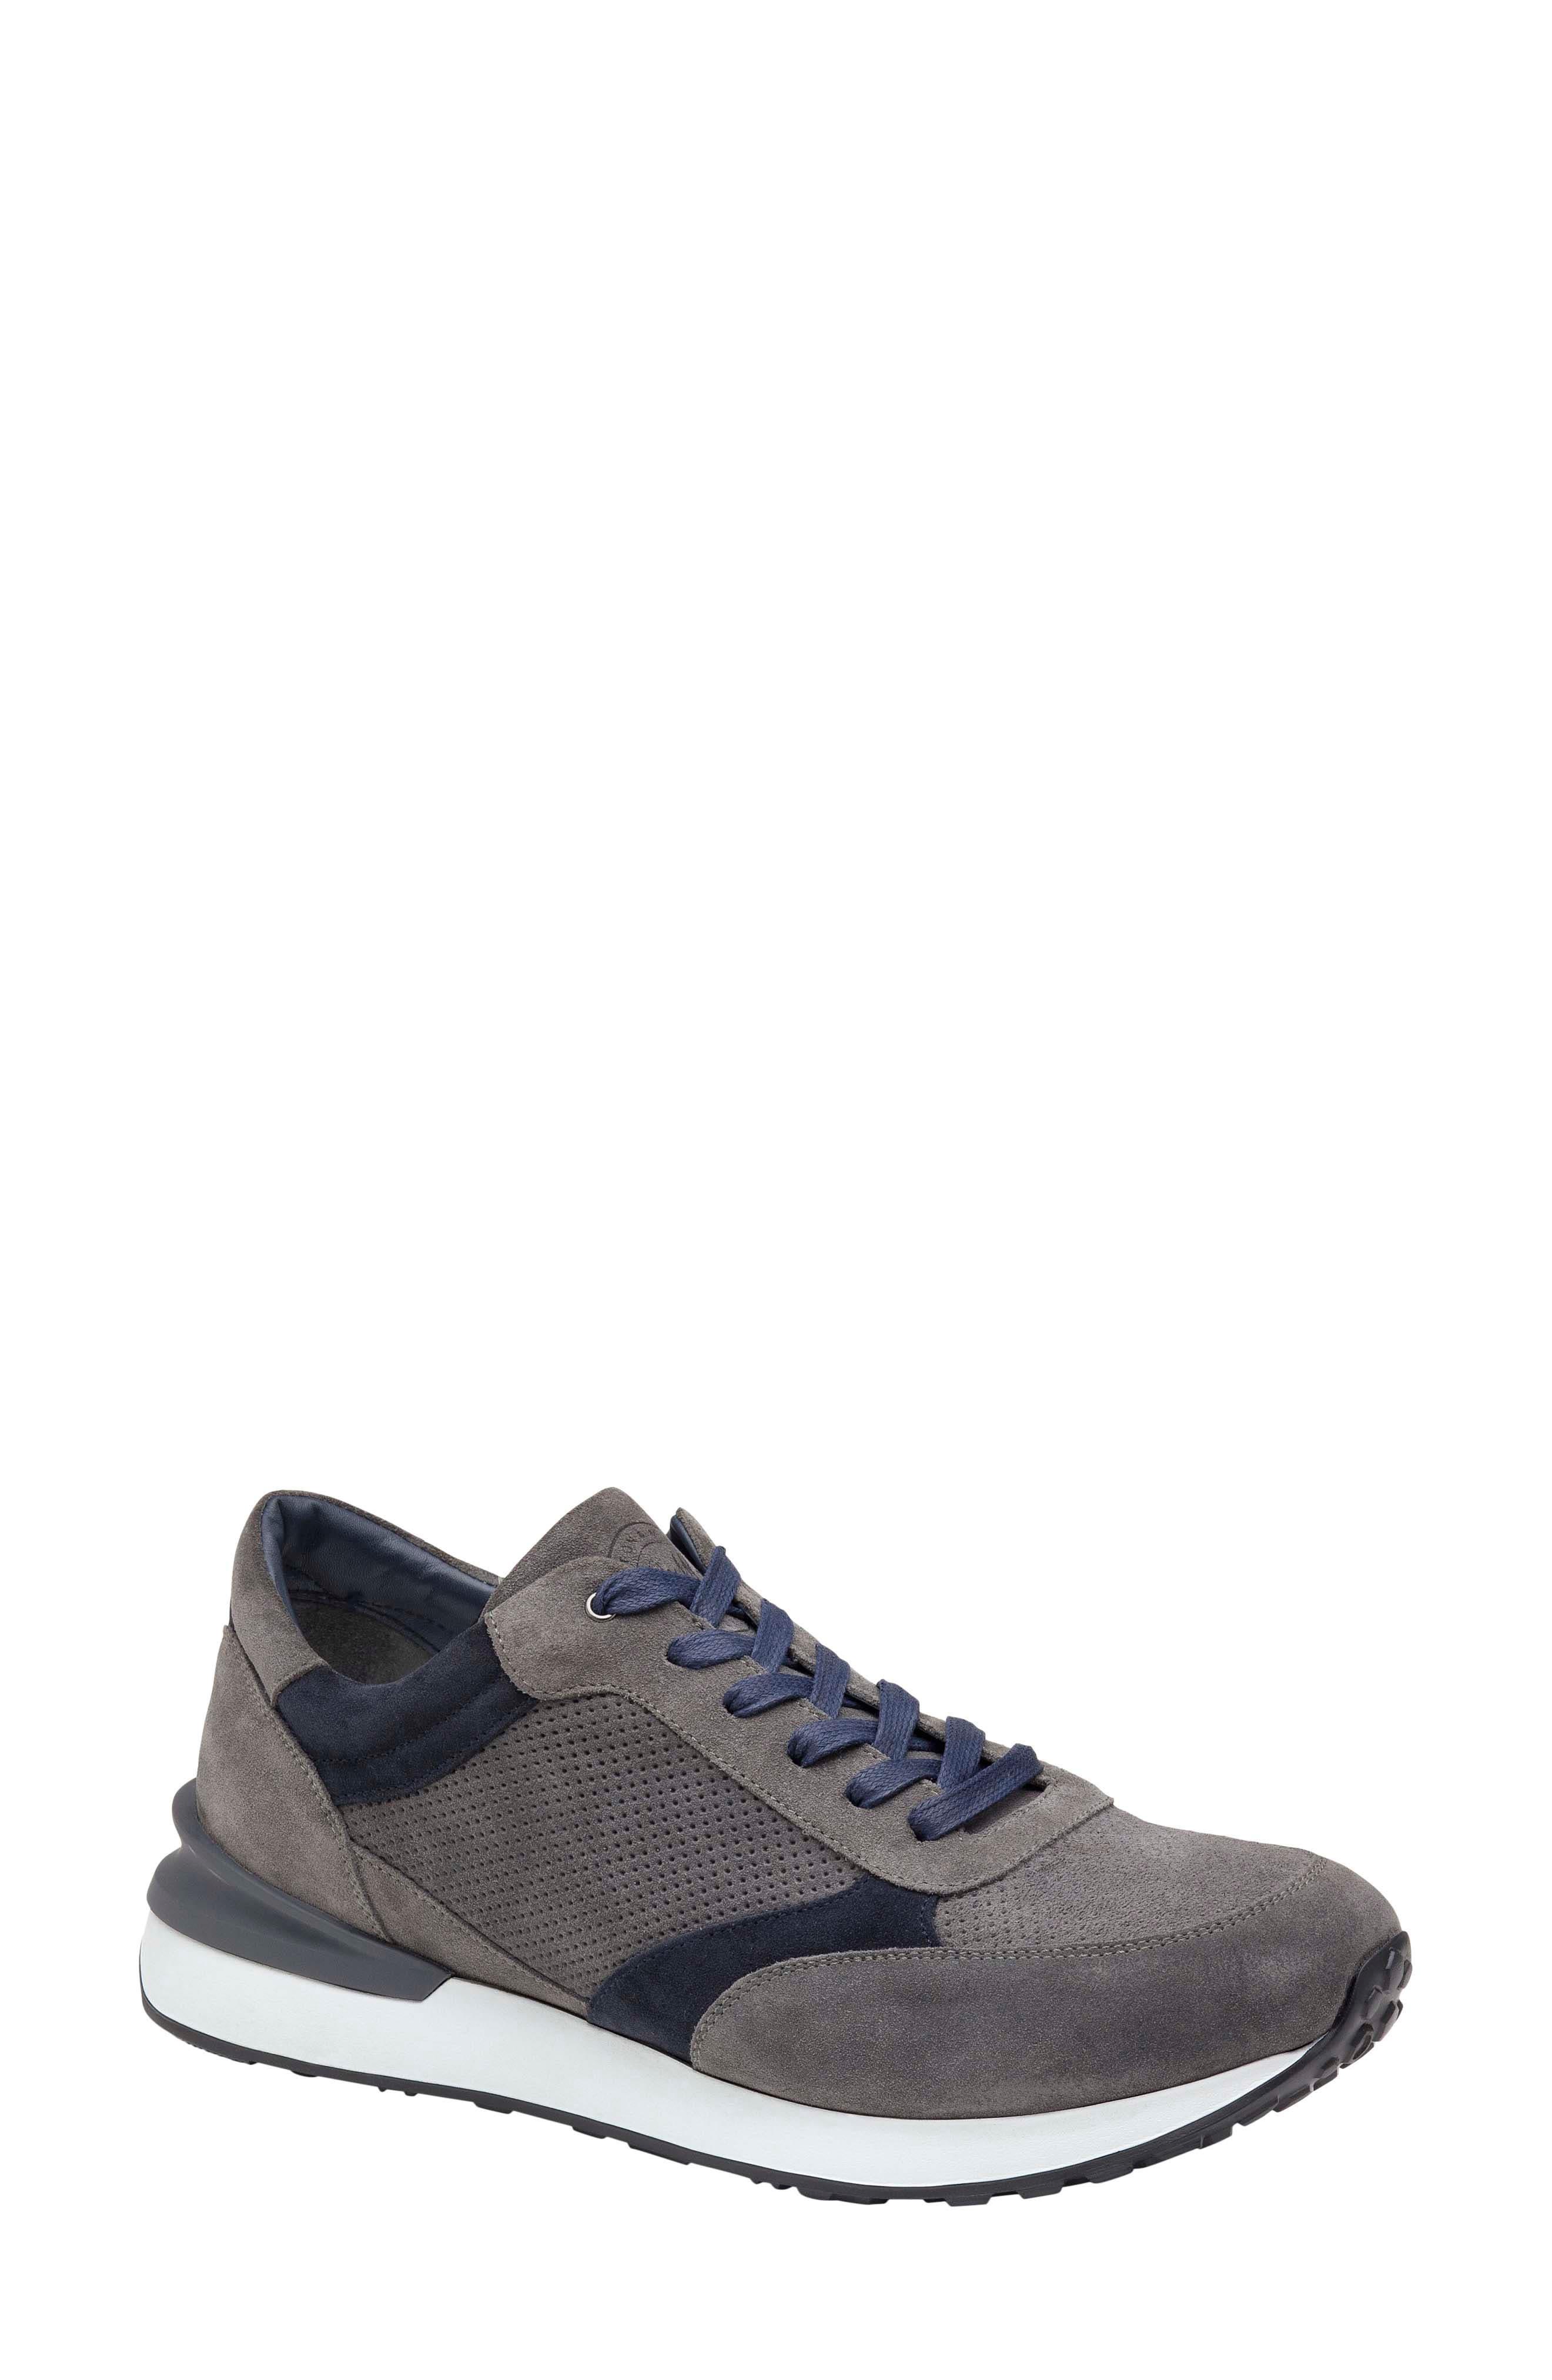 J & M COLLECTION Johnston & Murphy briggs jogger Sneaker in Gray for ...